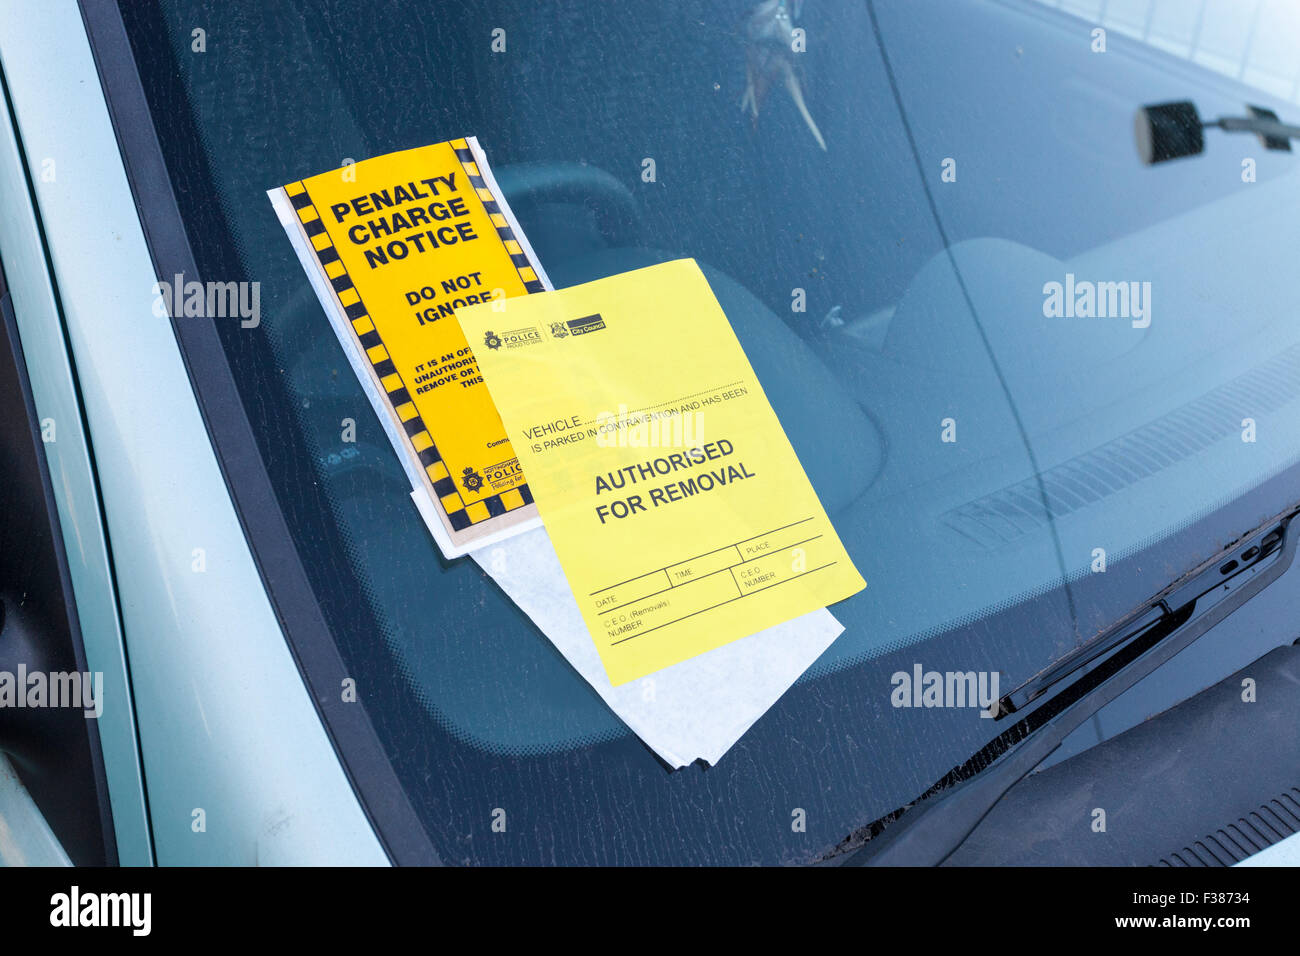 Parking ticket, UK. Penalty Charge notice with Authorised For Removal notice added and attached to a windscreen, Nottingham, England, UK Stock Photo